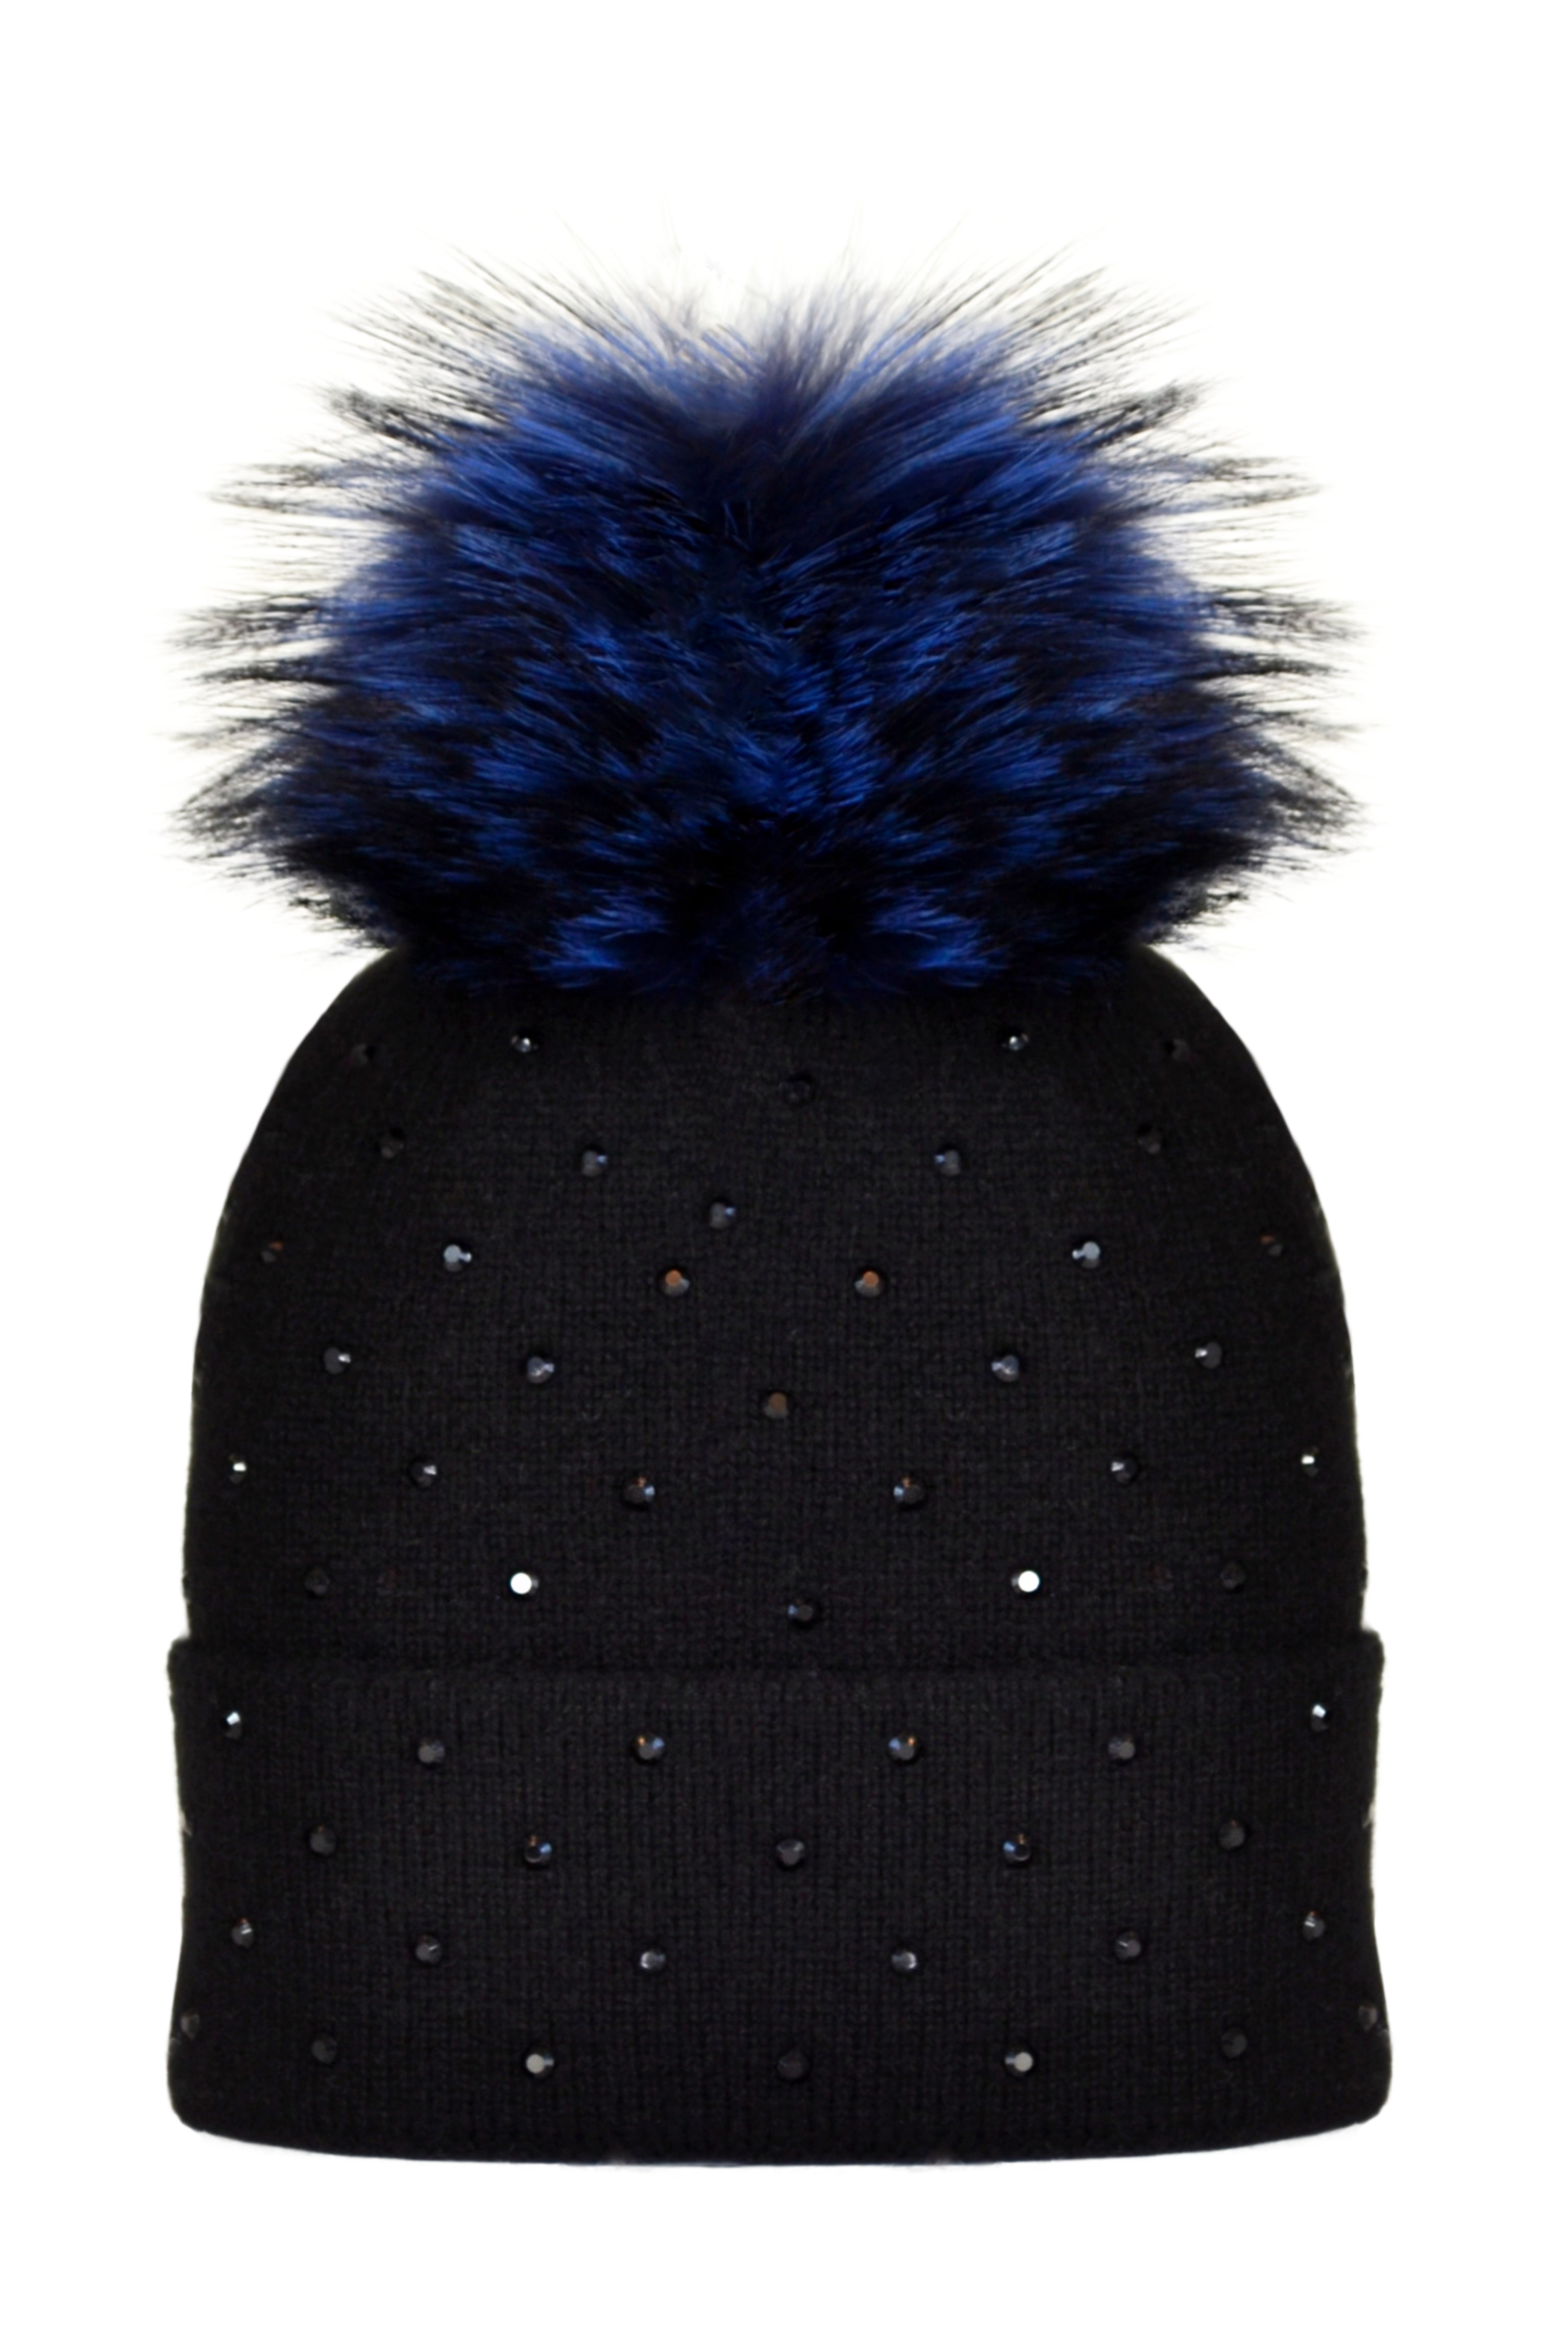 Black Cashmere Beanie with Scattered Crystals & Midnight Blue Pom